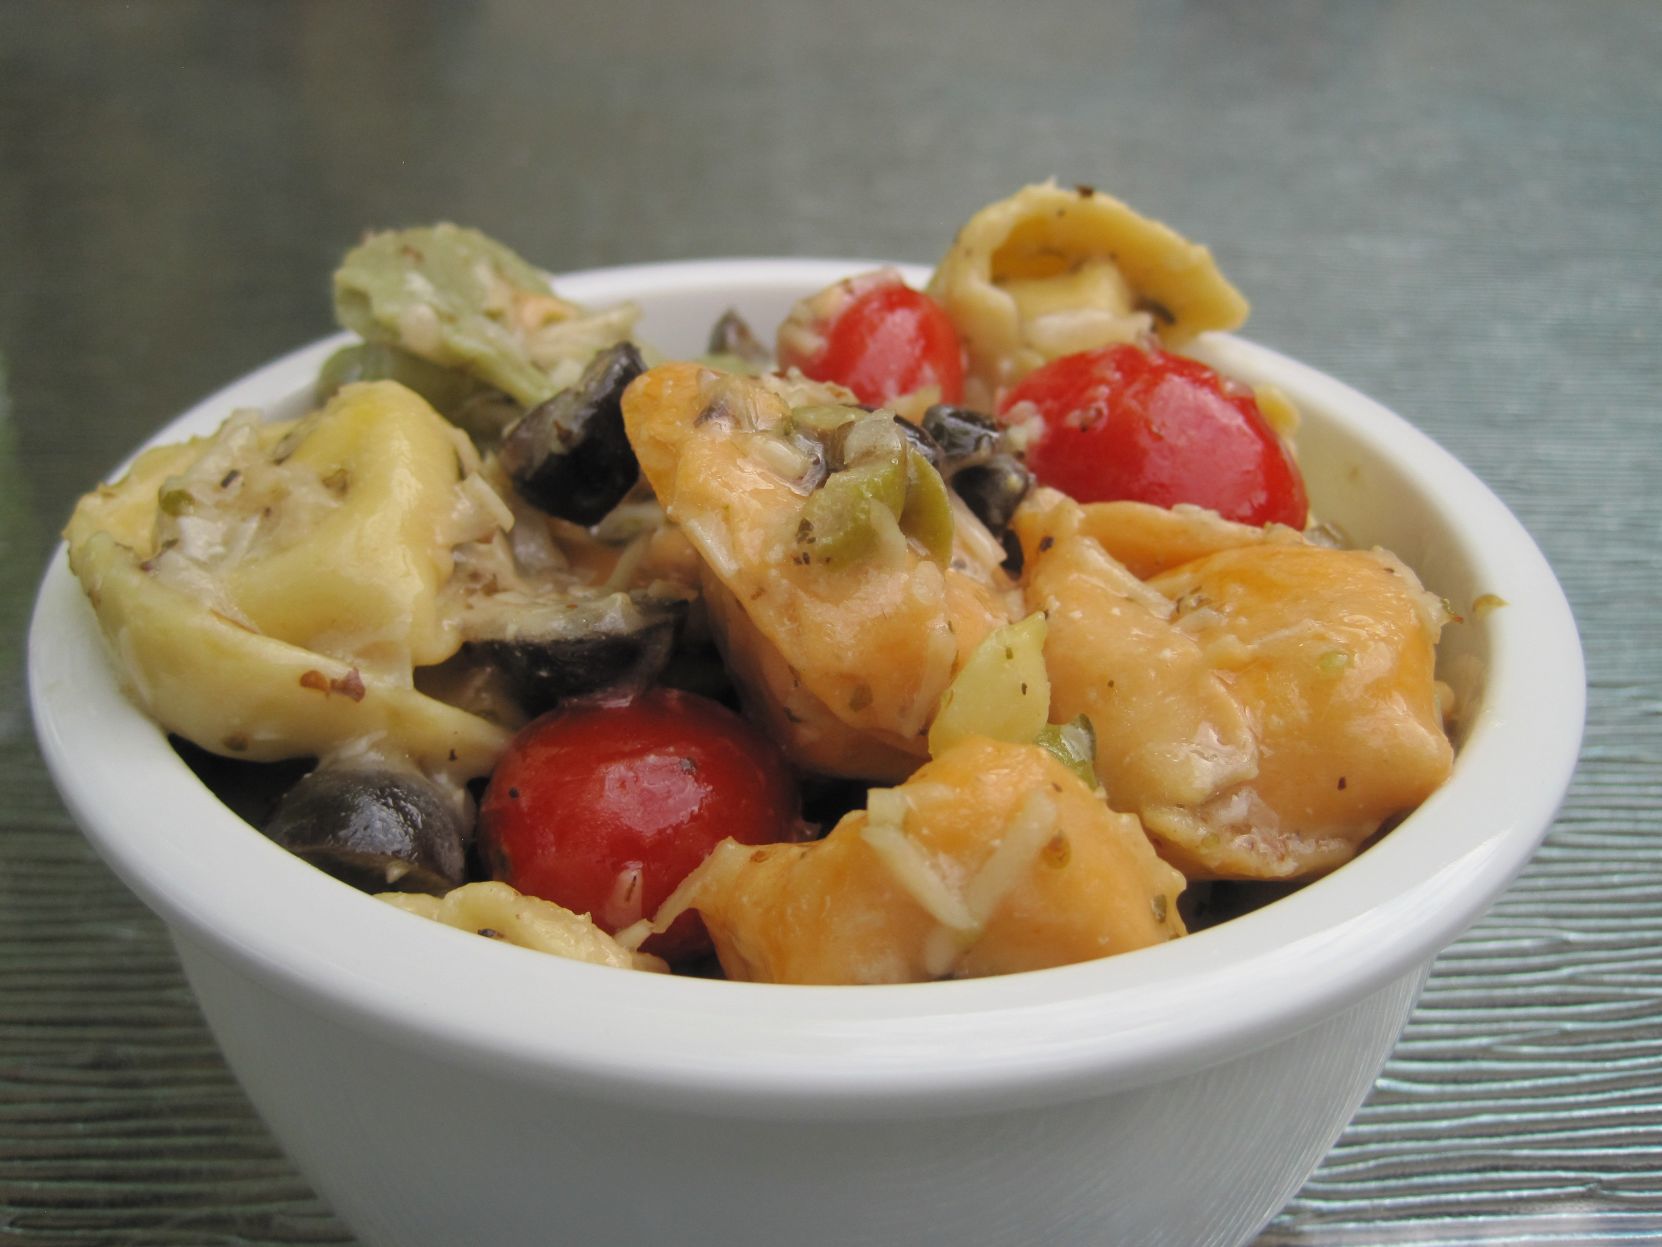 LeGrands tortellini salad is perfect for a picnic lunch